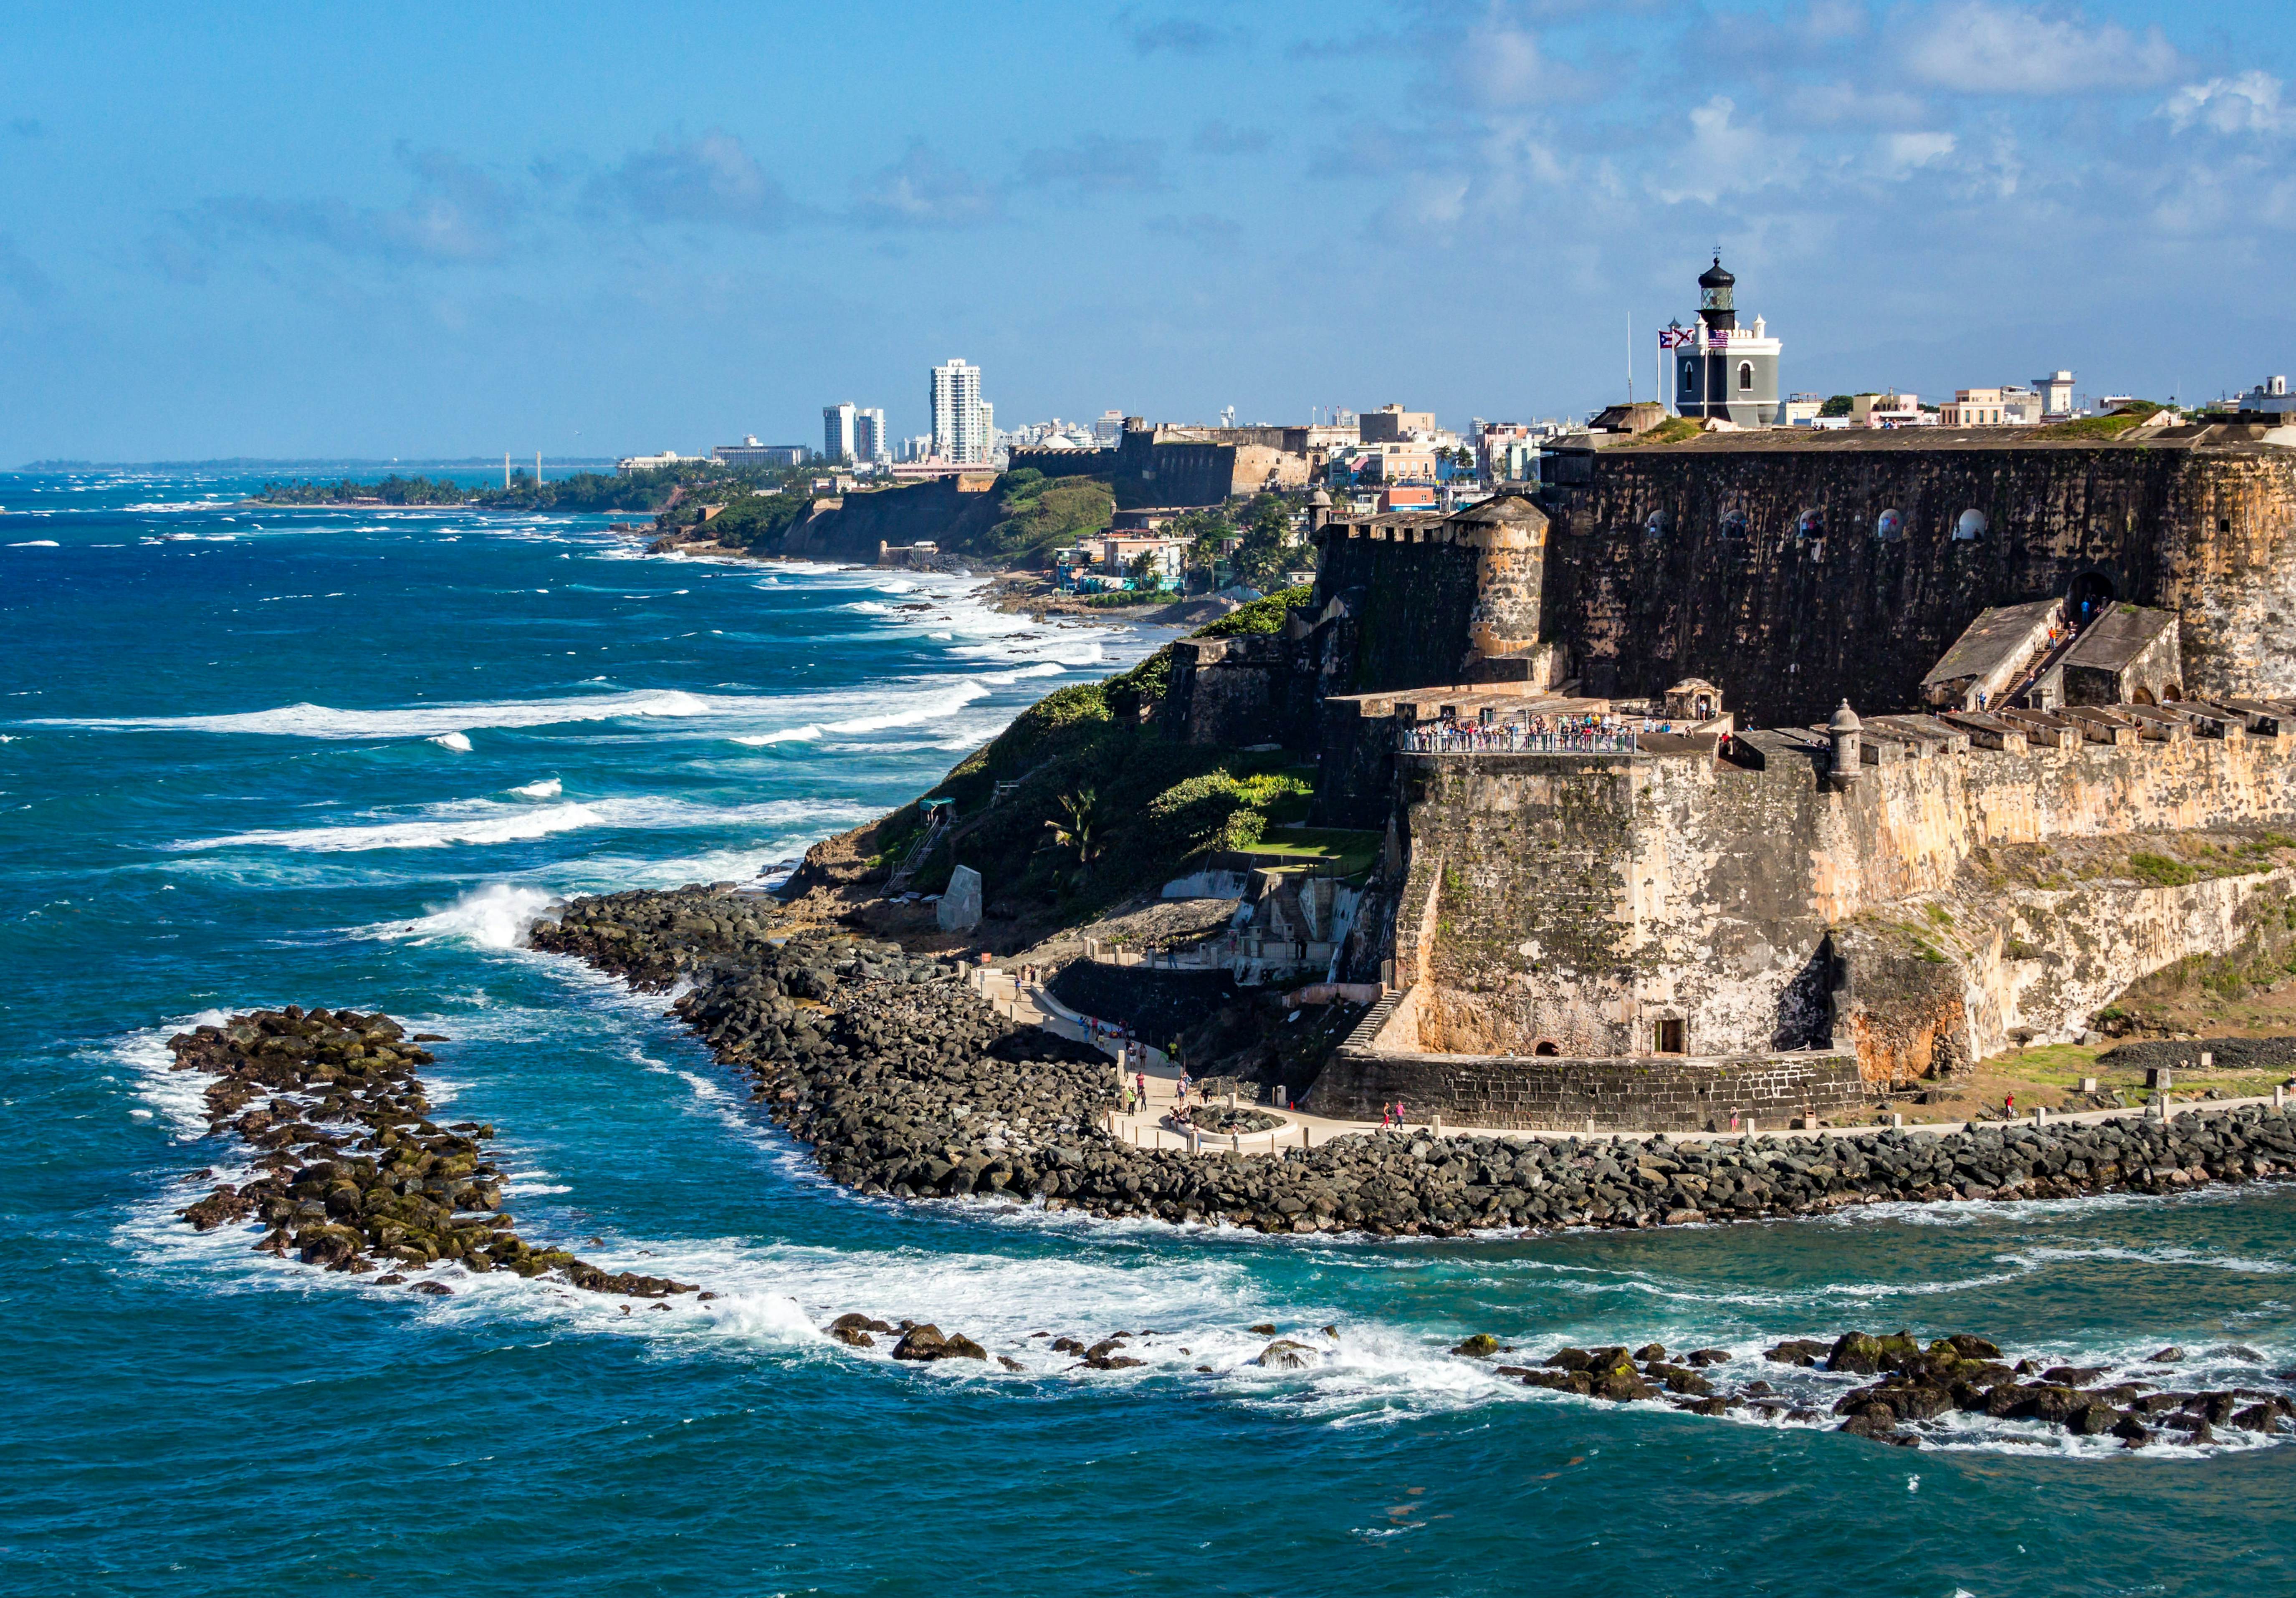 must see places to visit in puerto rico